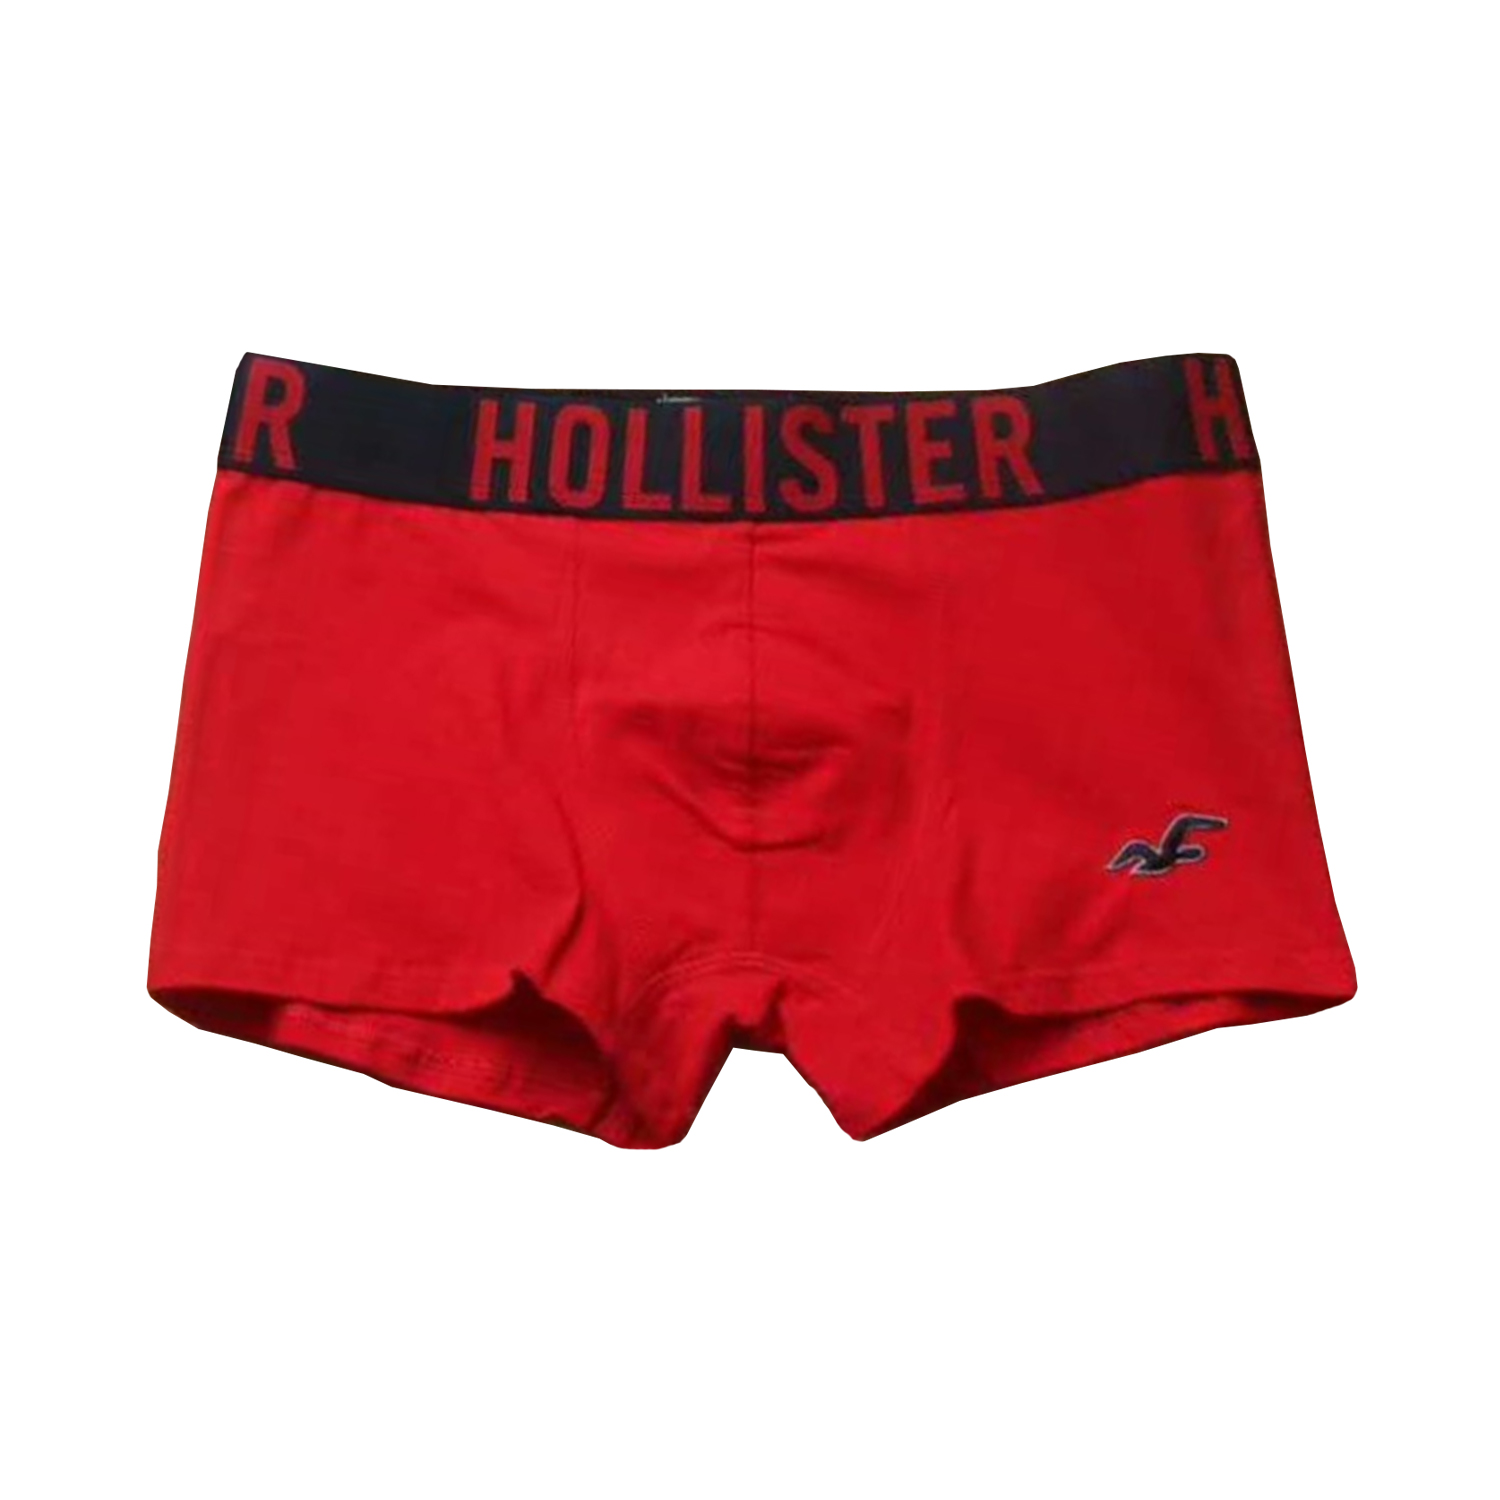 Hollister Boxer Briefs | WHAT'S ON THE 